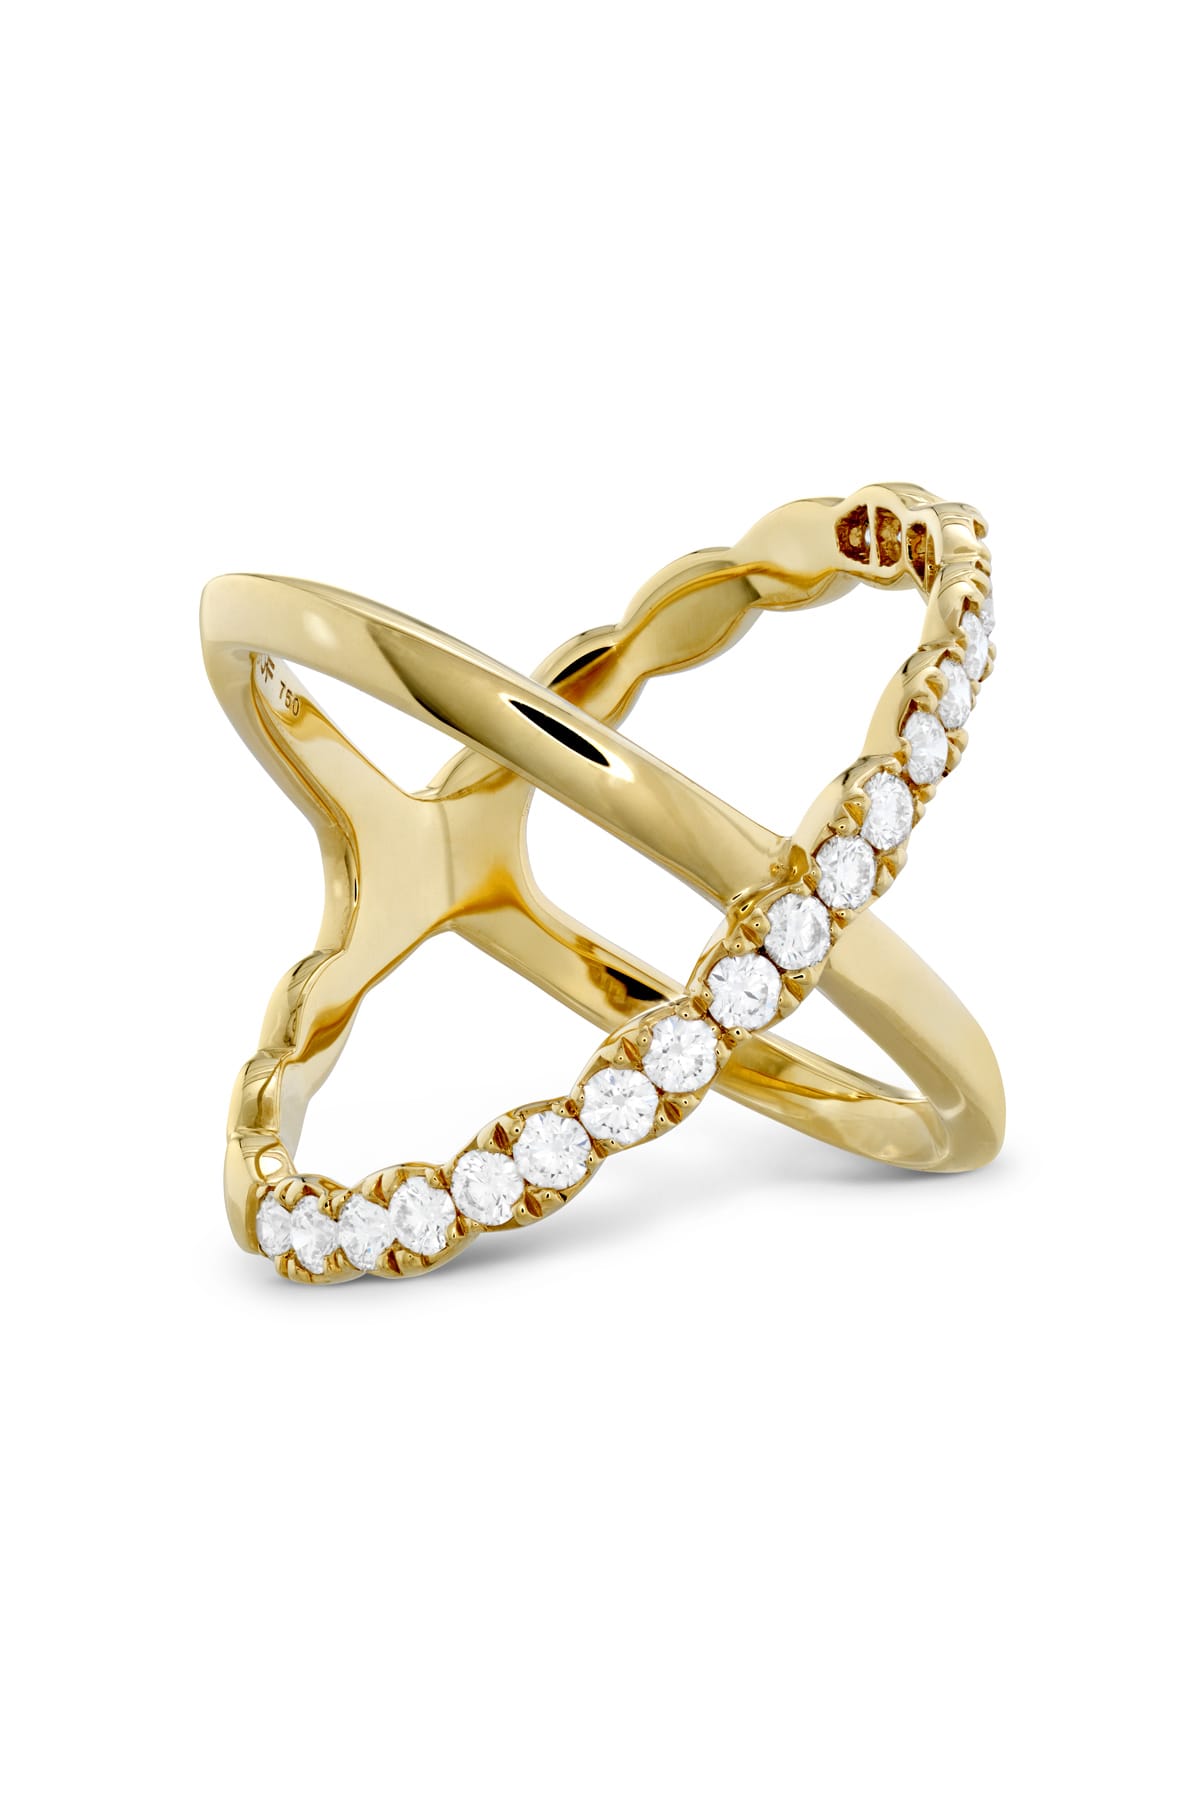 Lorelei Criss Cross Ring From Hearts On Fire available at LeGassick Diamonds and Jewellery Gold Coast, Australia.